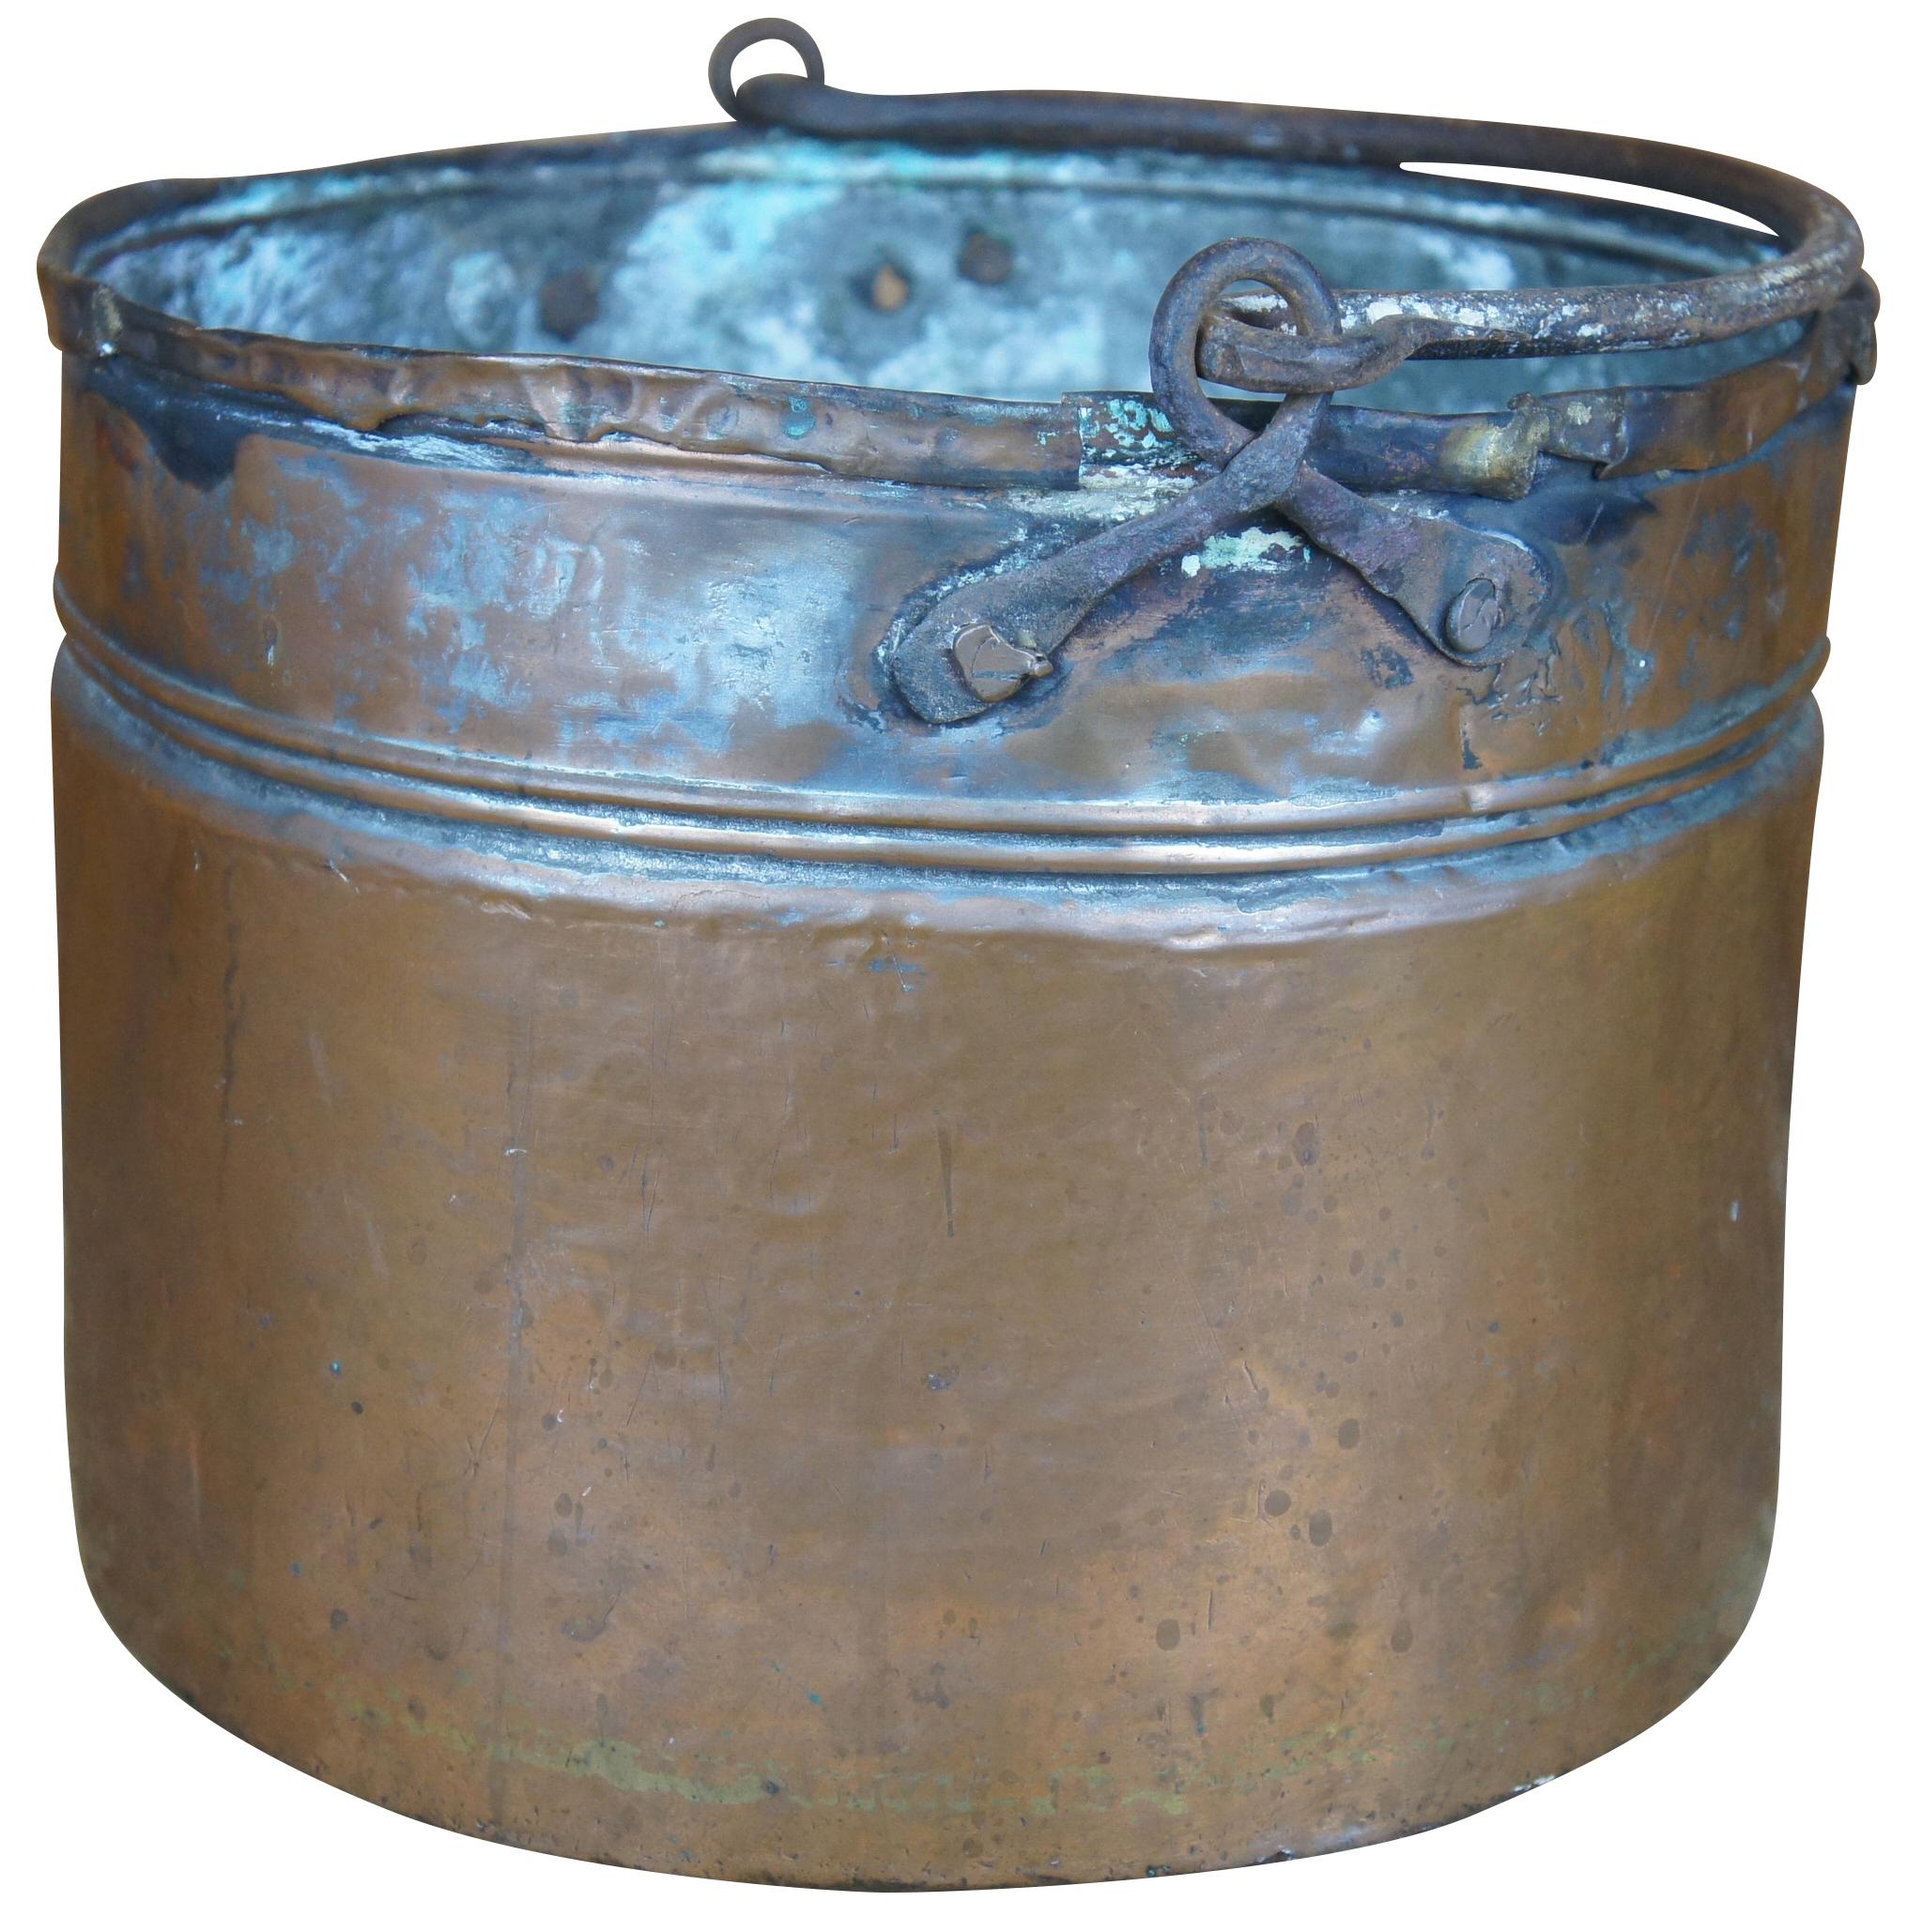 Antique 18th century hammered and dovetailed copper cauldron featuring ornate scrolled iron handle and double banding. Measures: 12